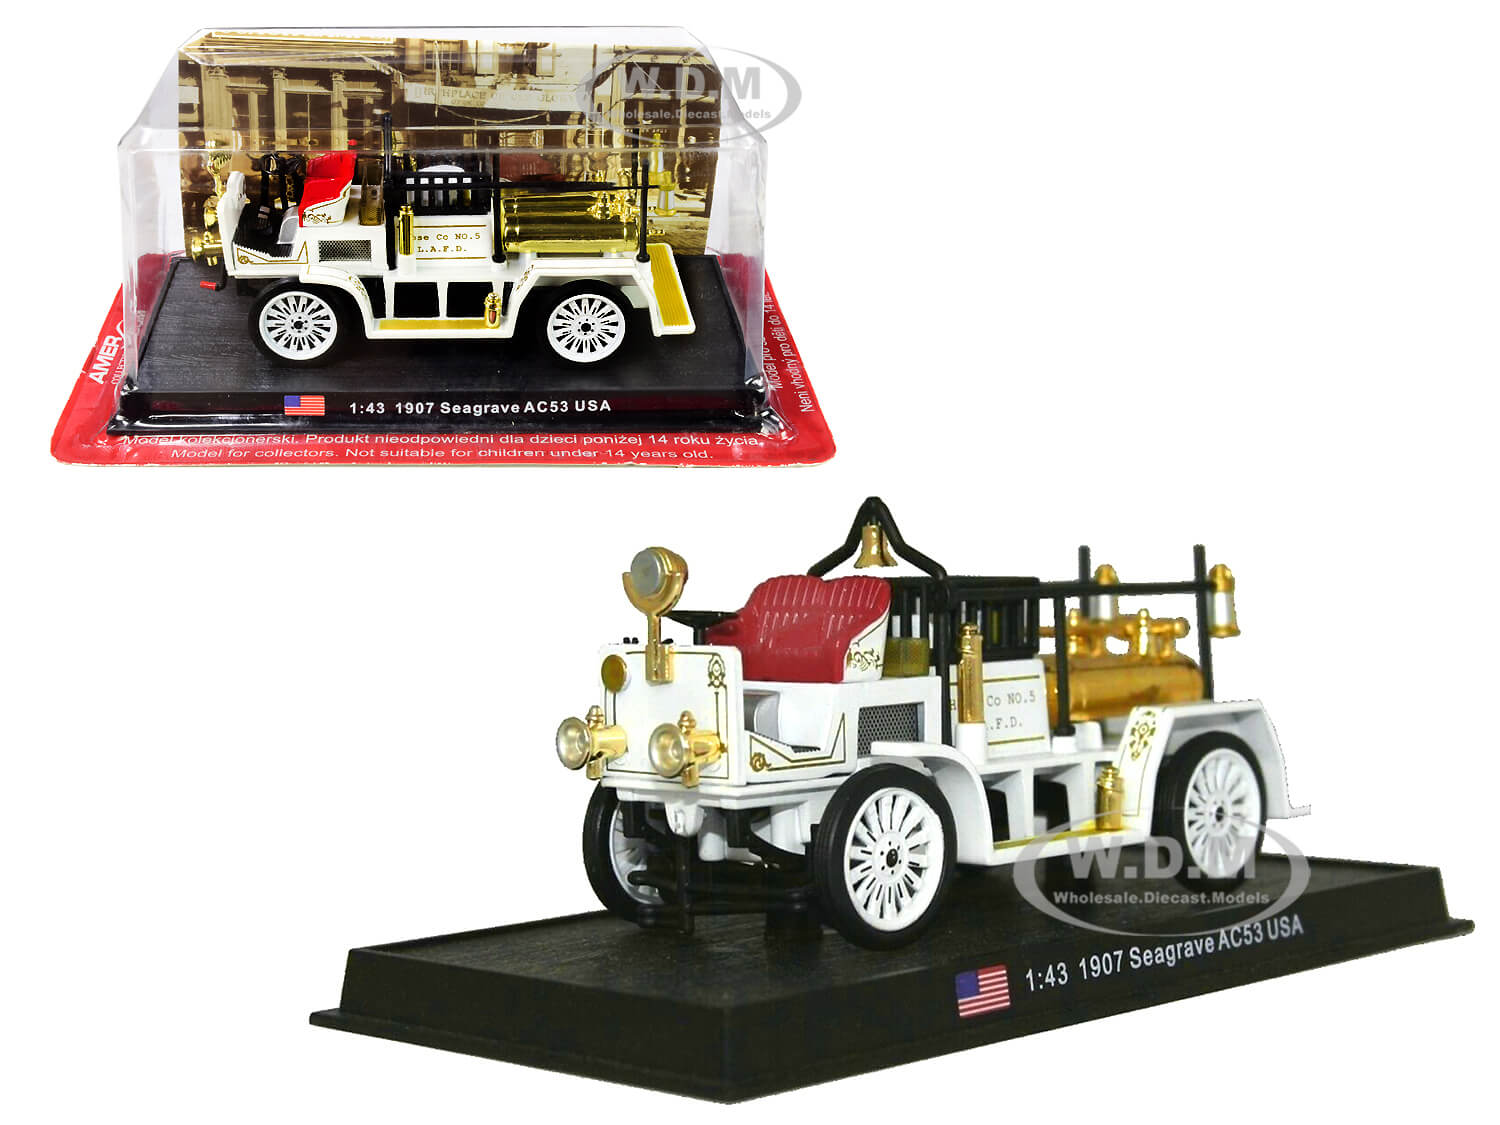 1907 Seagrave AC53 Fire Engine Truck "Los Angeles Fire Department" (L.A.F.D.) 1/43 Diecast Model by Amercom